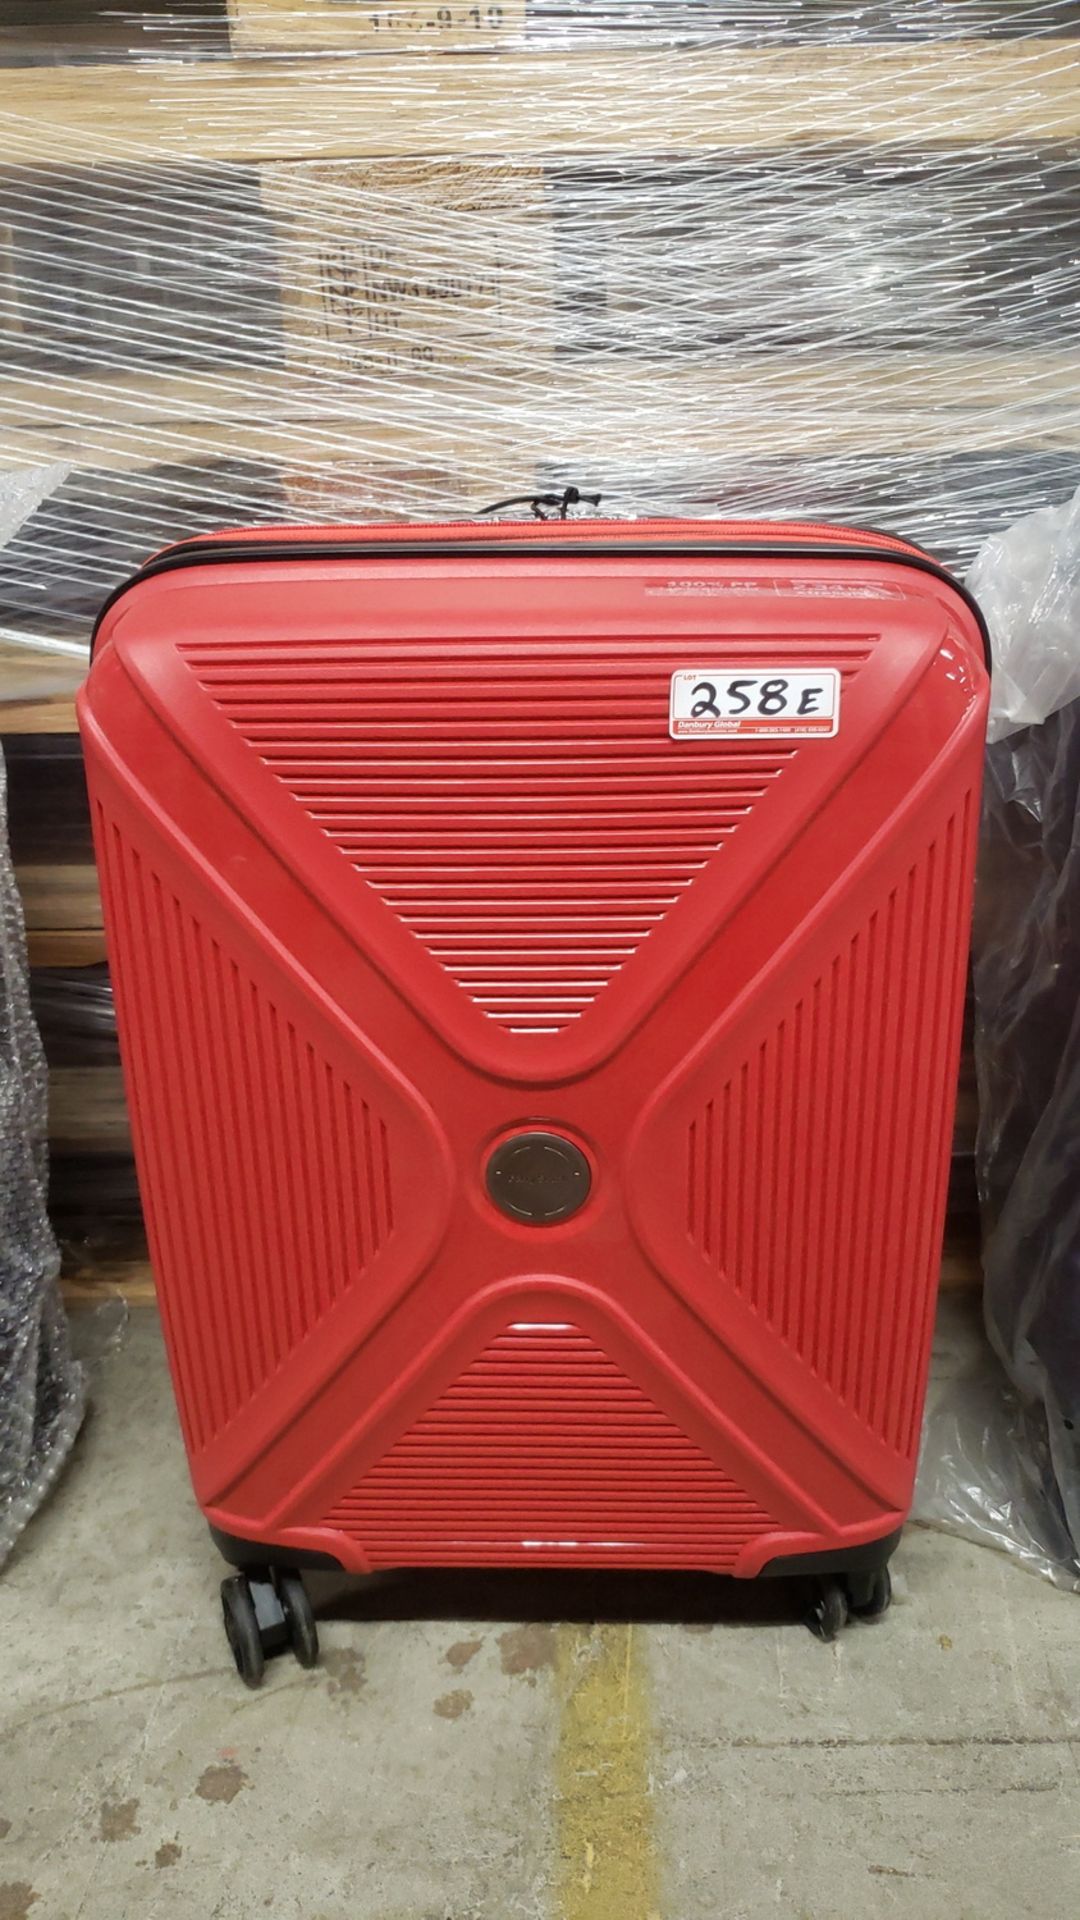 BARRY SMITH RED HARD CASE CARRY-ON LUGGAGE (NEW)